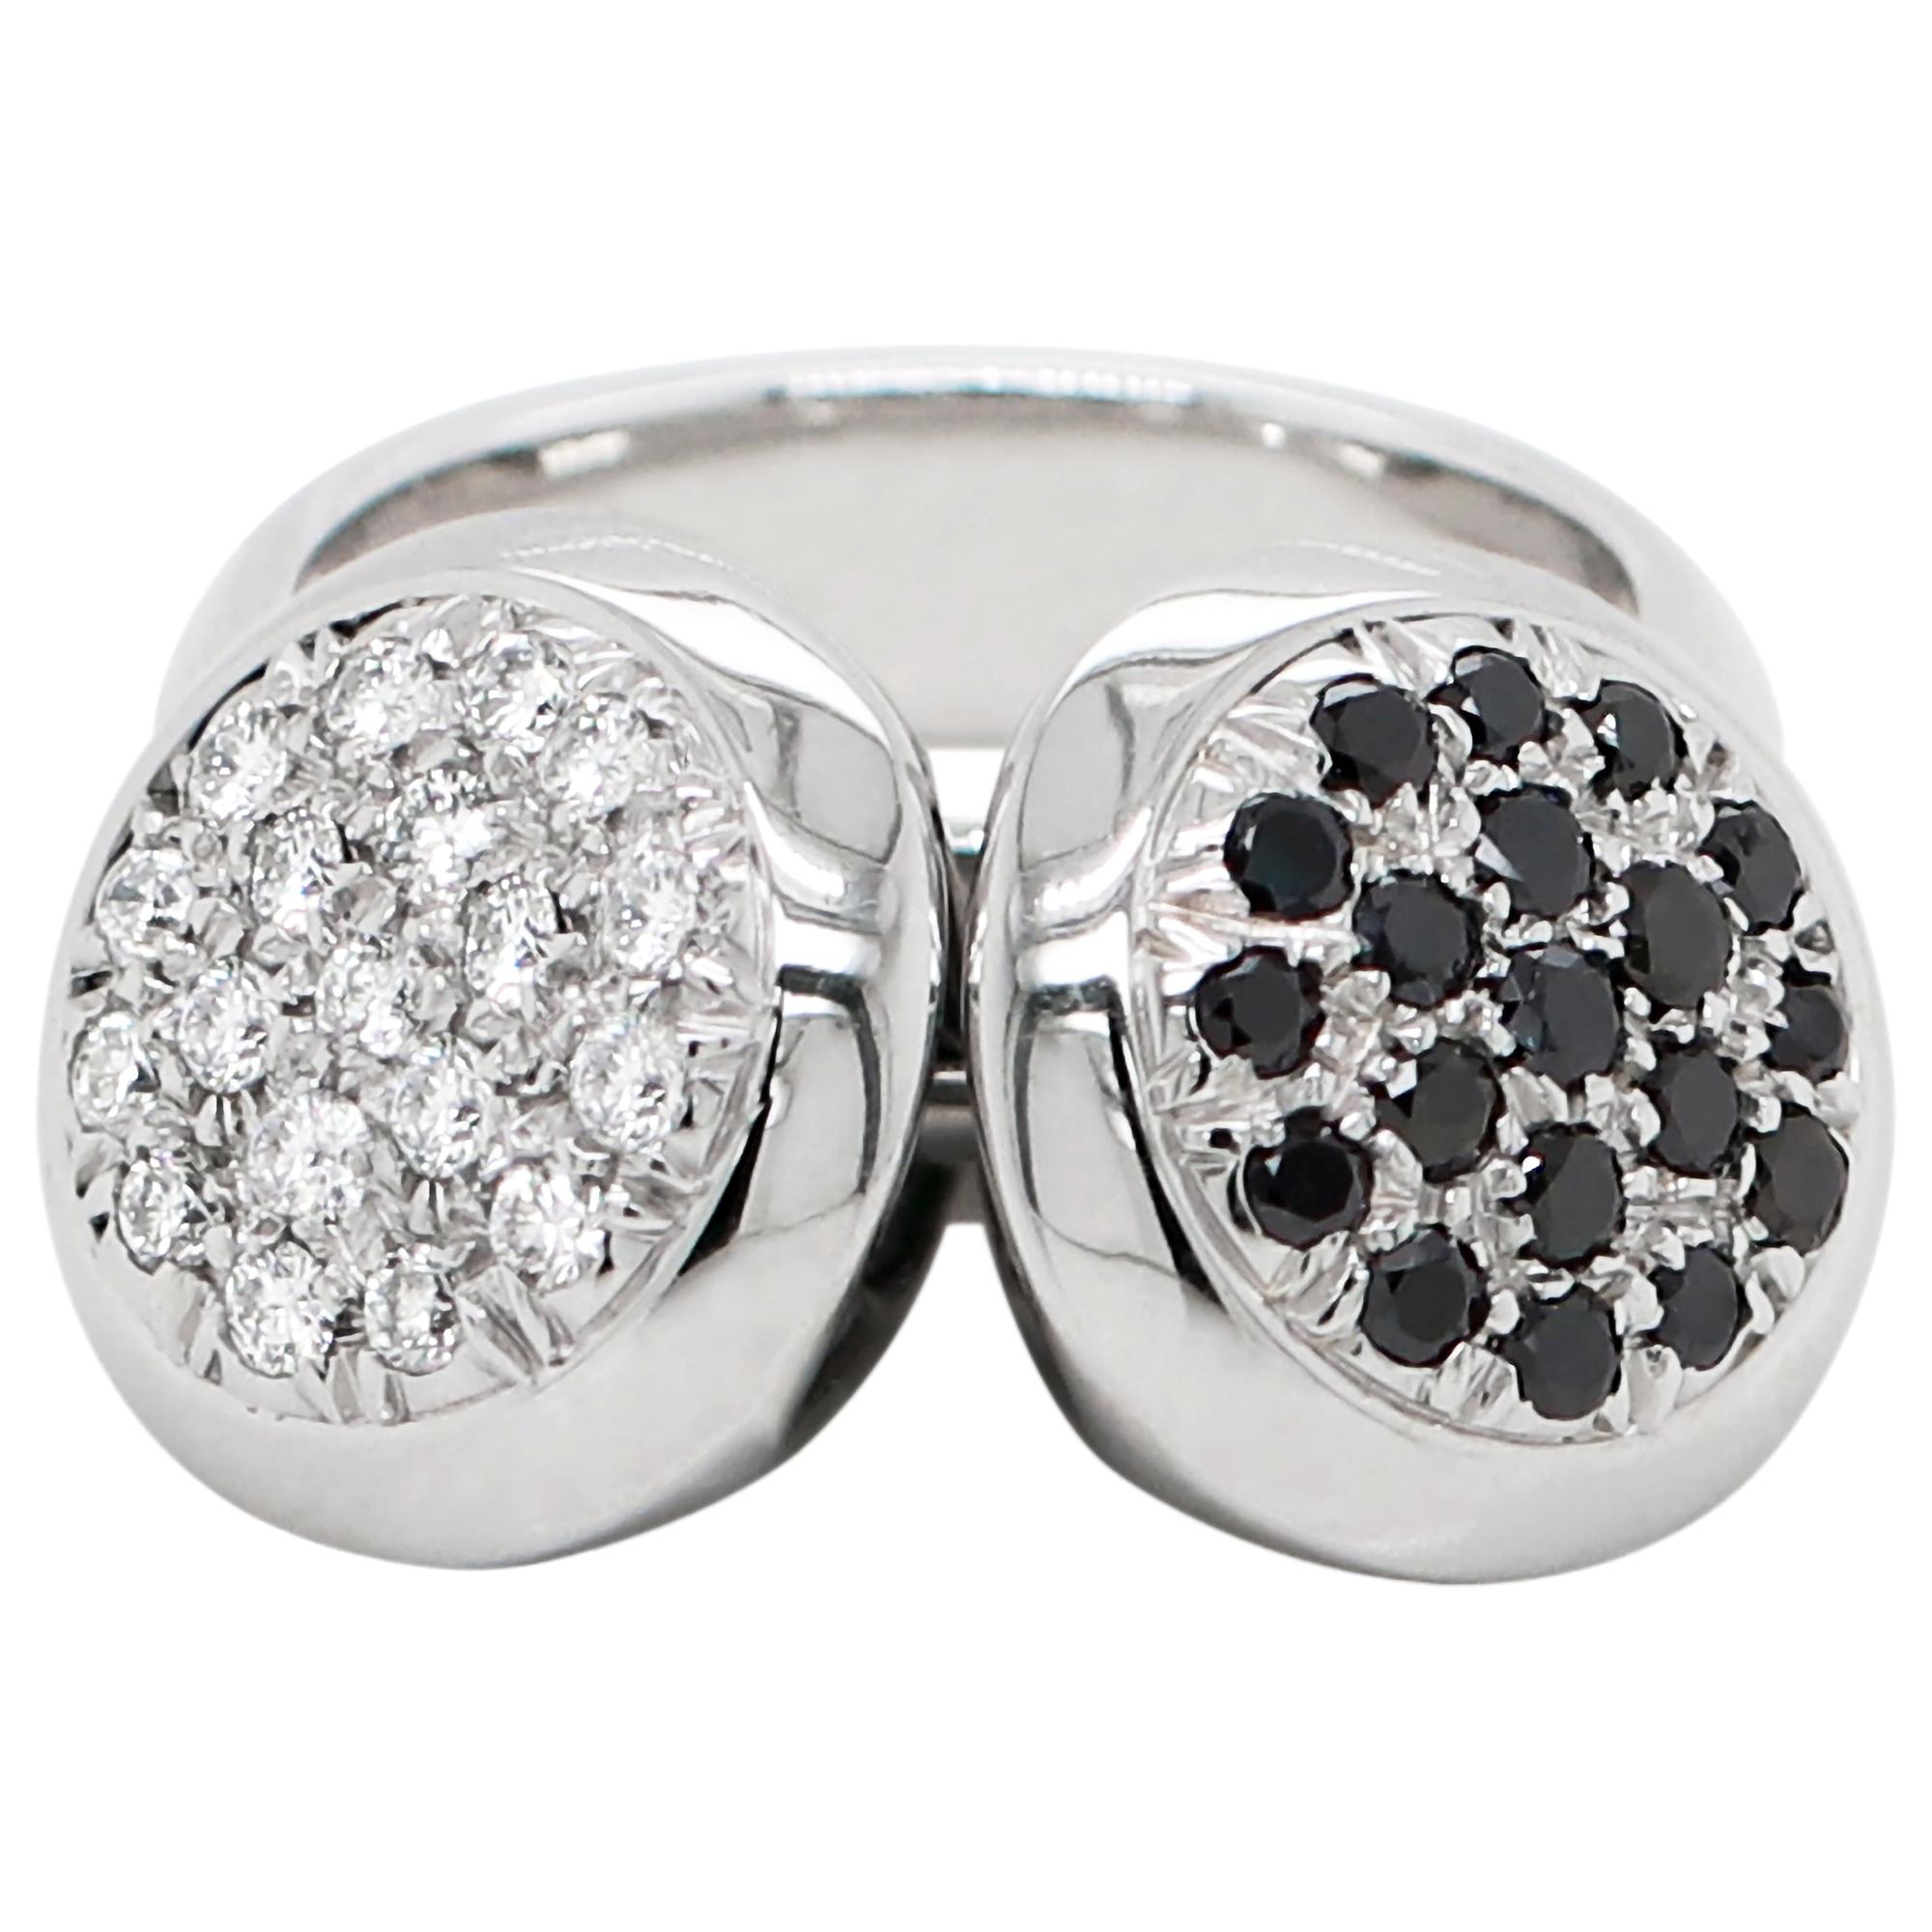 Black and White Diamond 18 Carat White Gold Dangling Charms Cocktail Ring